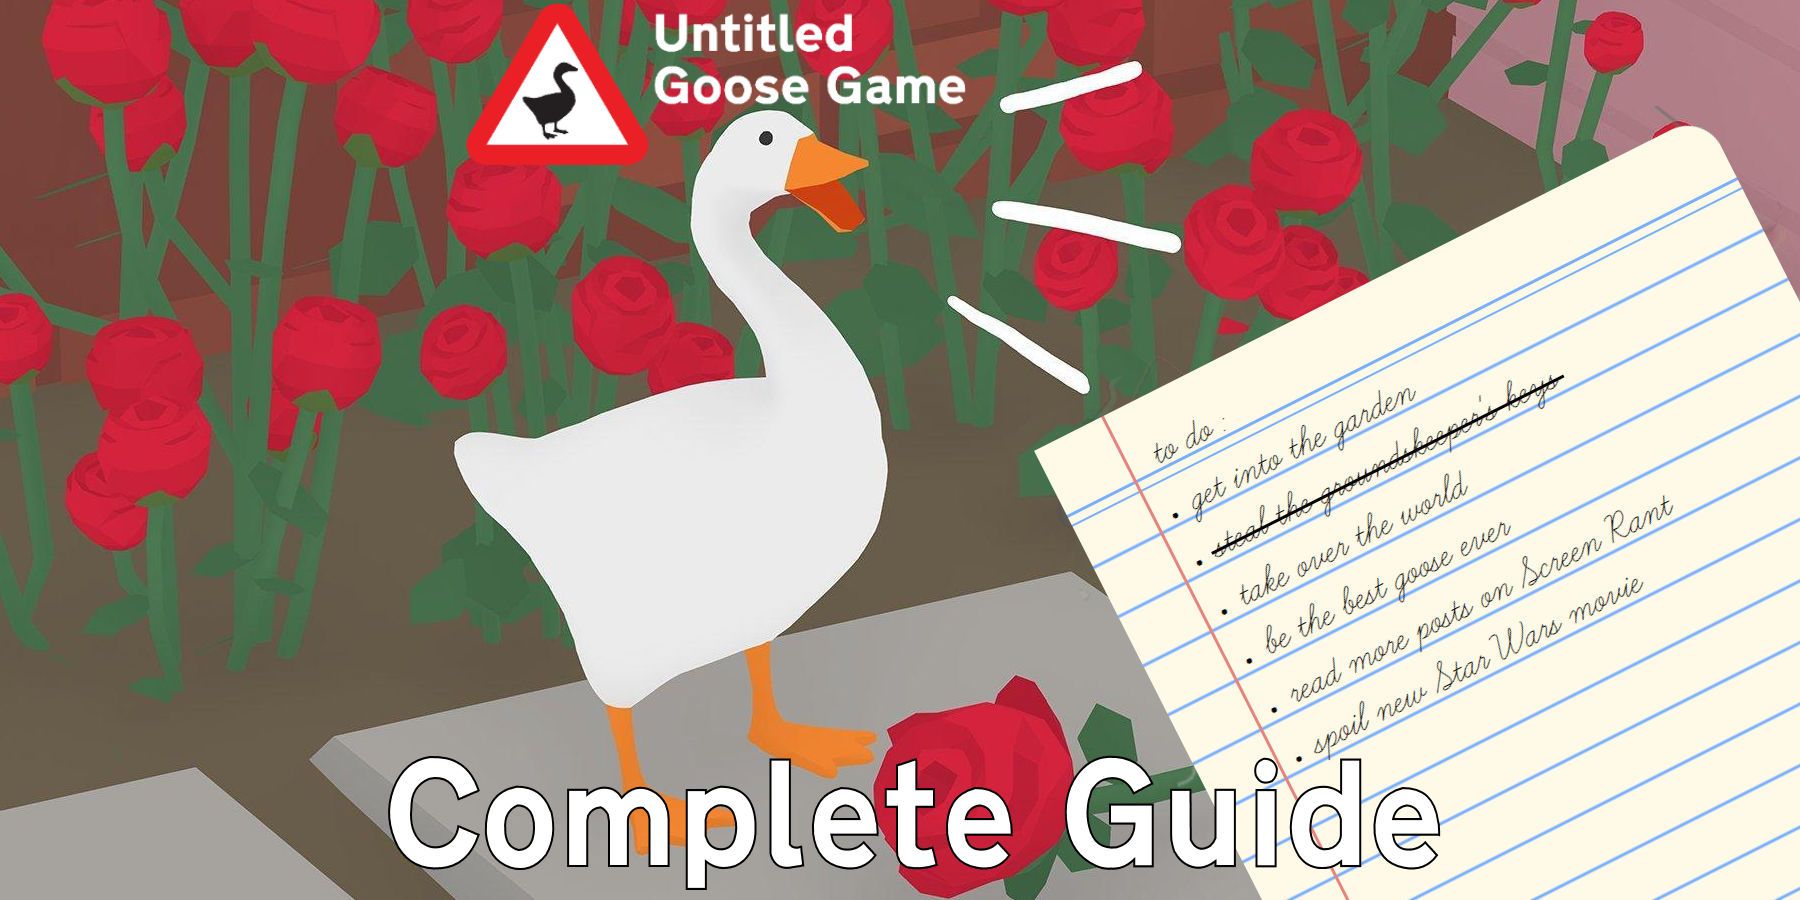 Untitled Goose Game tops the charts with plans to release on more